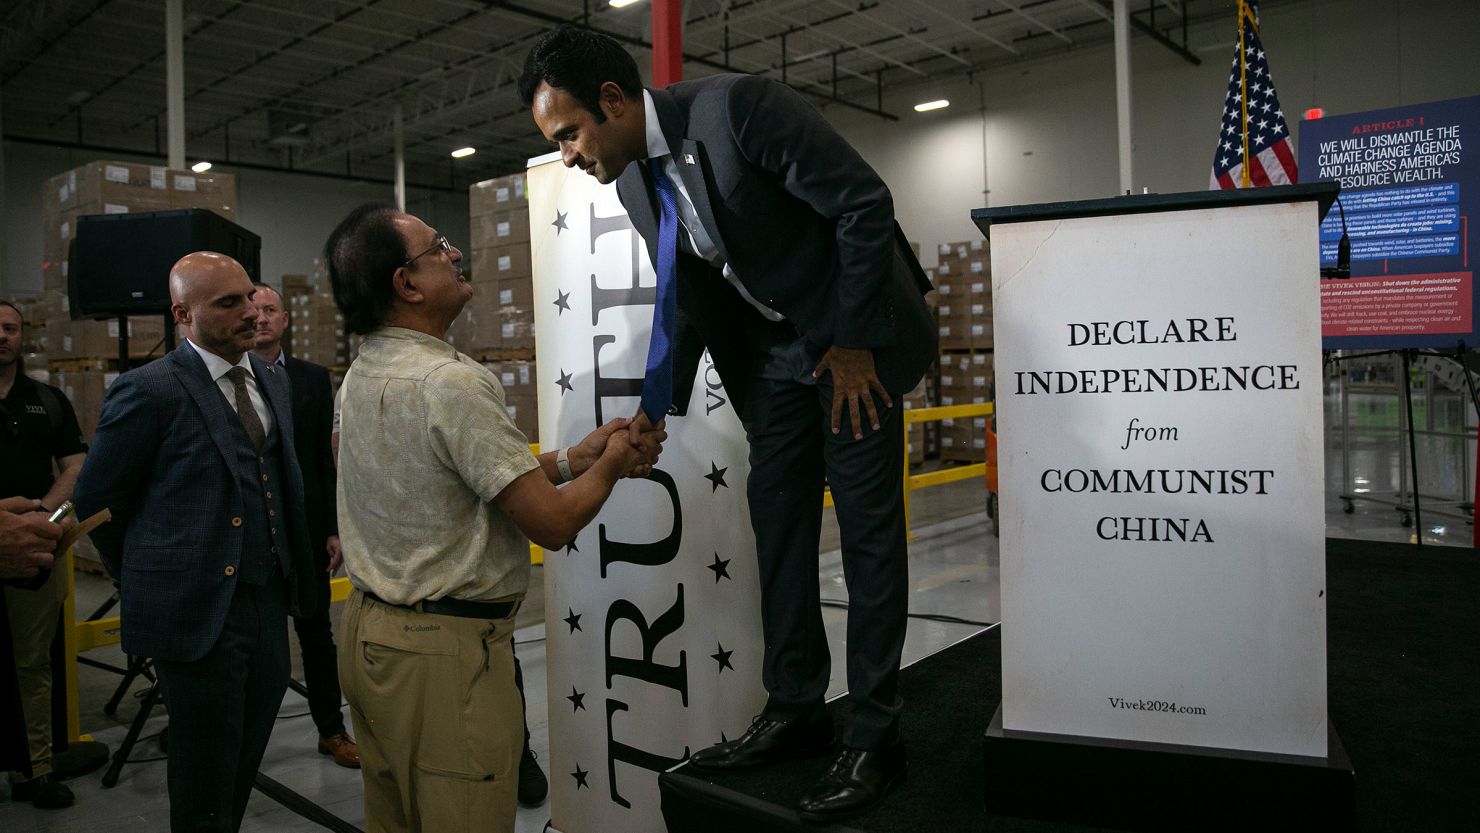 Vivek Ramaswamy greets attendees during an event in New Albany, Ohio, on Thursday, September 21.